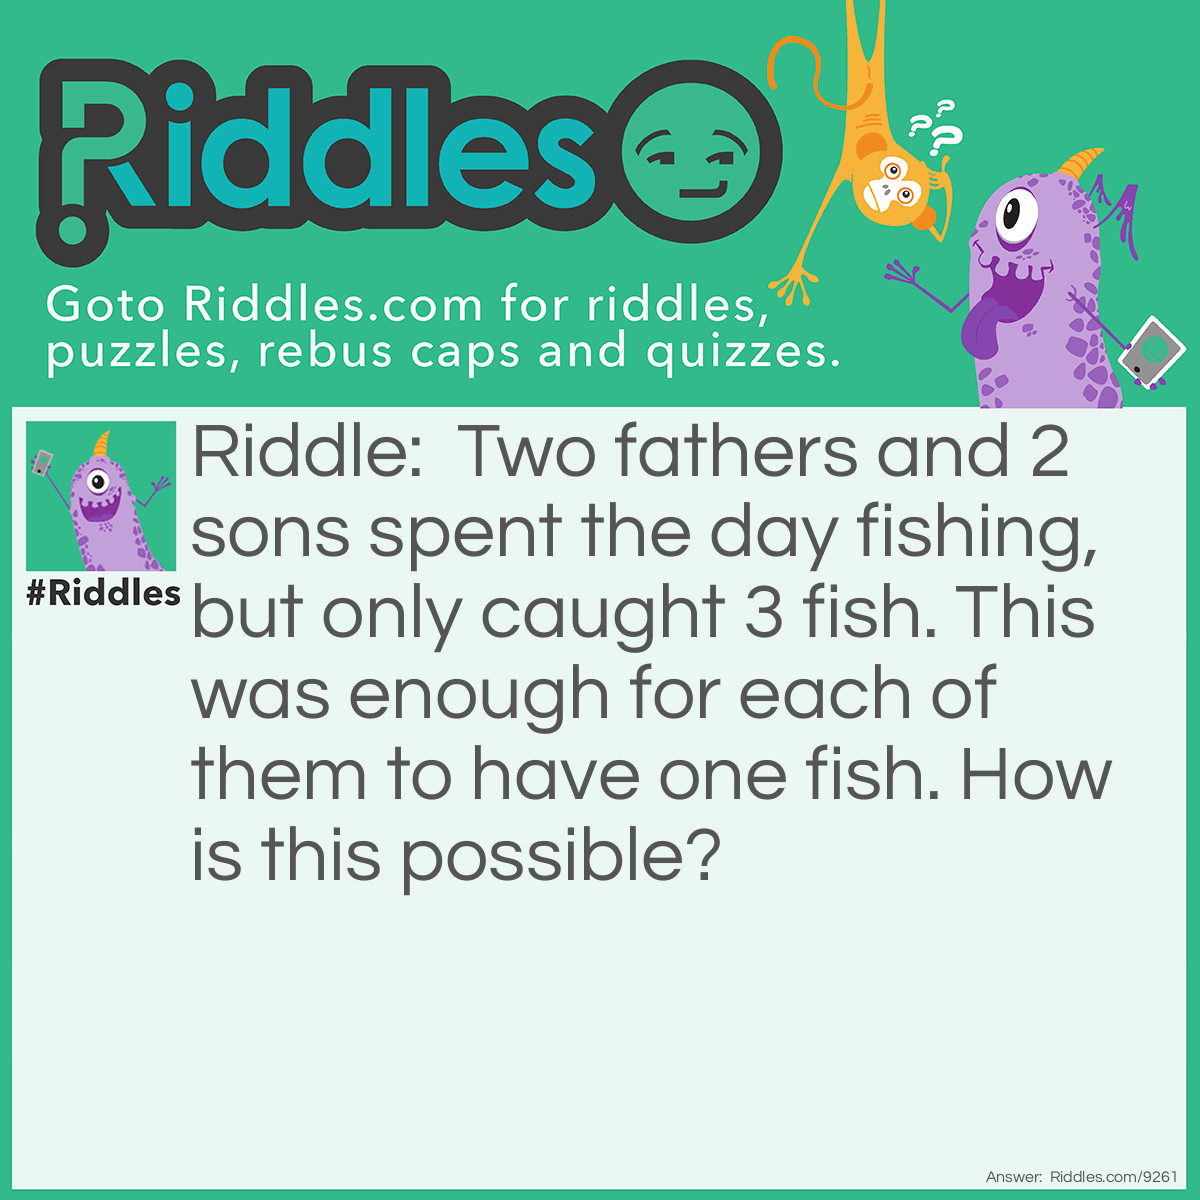 Riddle: Two fathers and 2 sons spent the day fishing, but only caught 3 fish. This was enough for each of them to have one fish. How is this possible? Answer: There were only 3 people fishing. There was one father, his son, and his son's son. This means there were 2 fathers and 2 sons, since one of them is a father and a son.